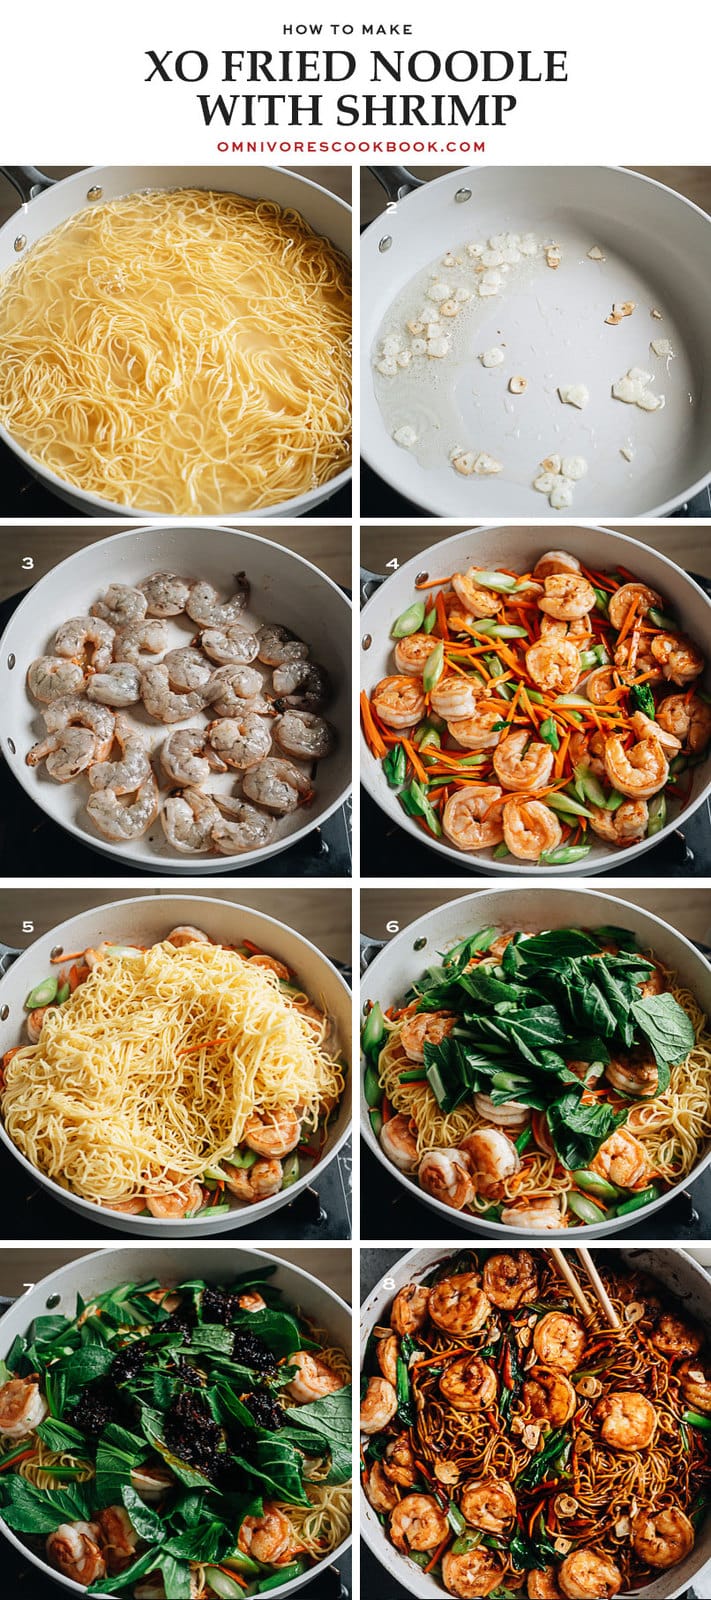 How to make XO fried noodles step-by-step